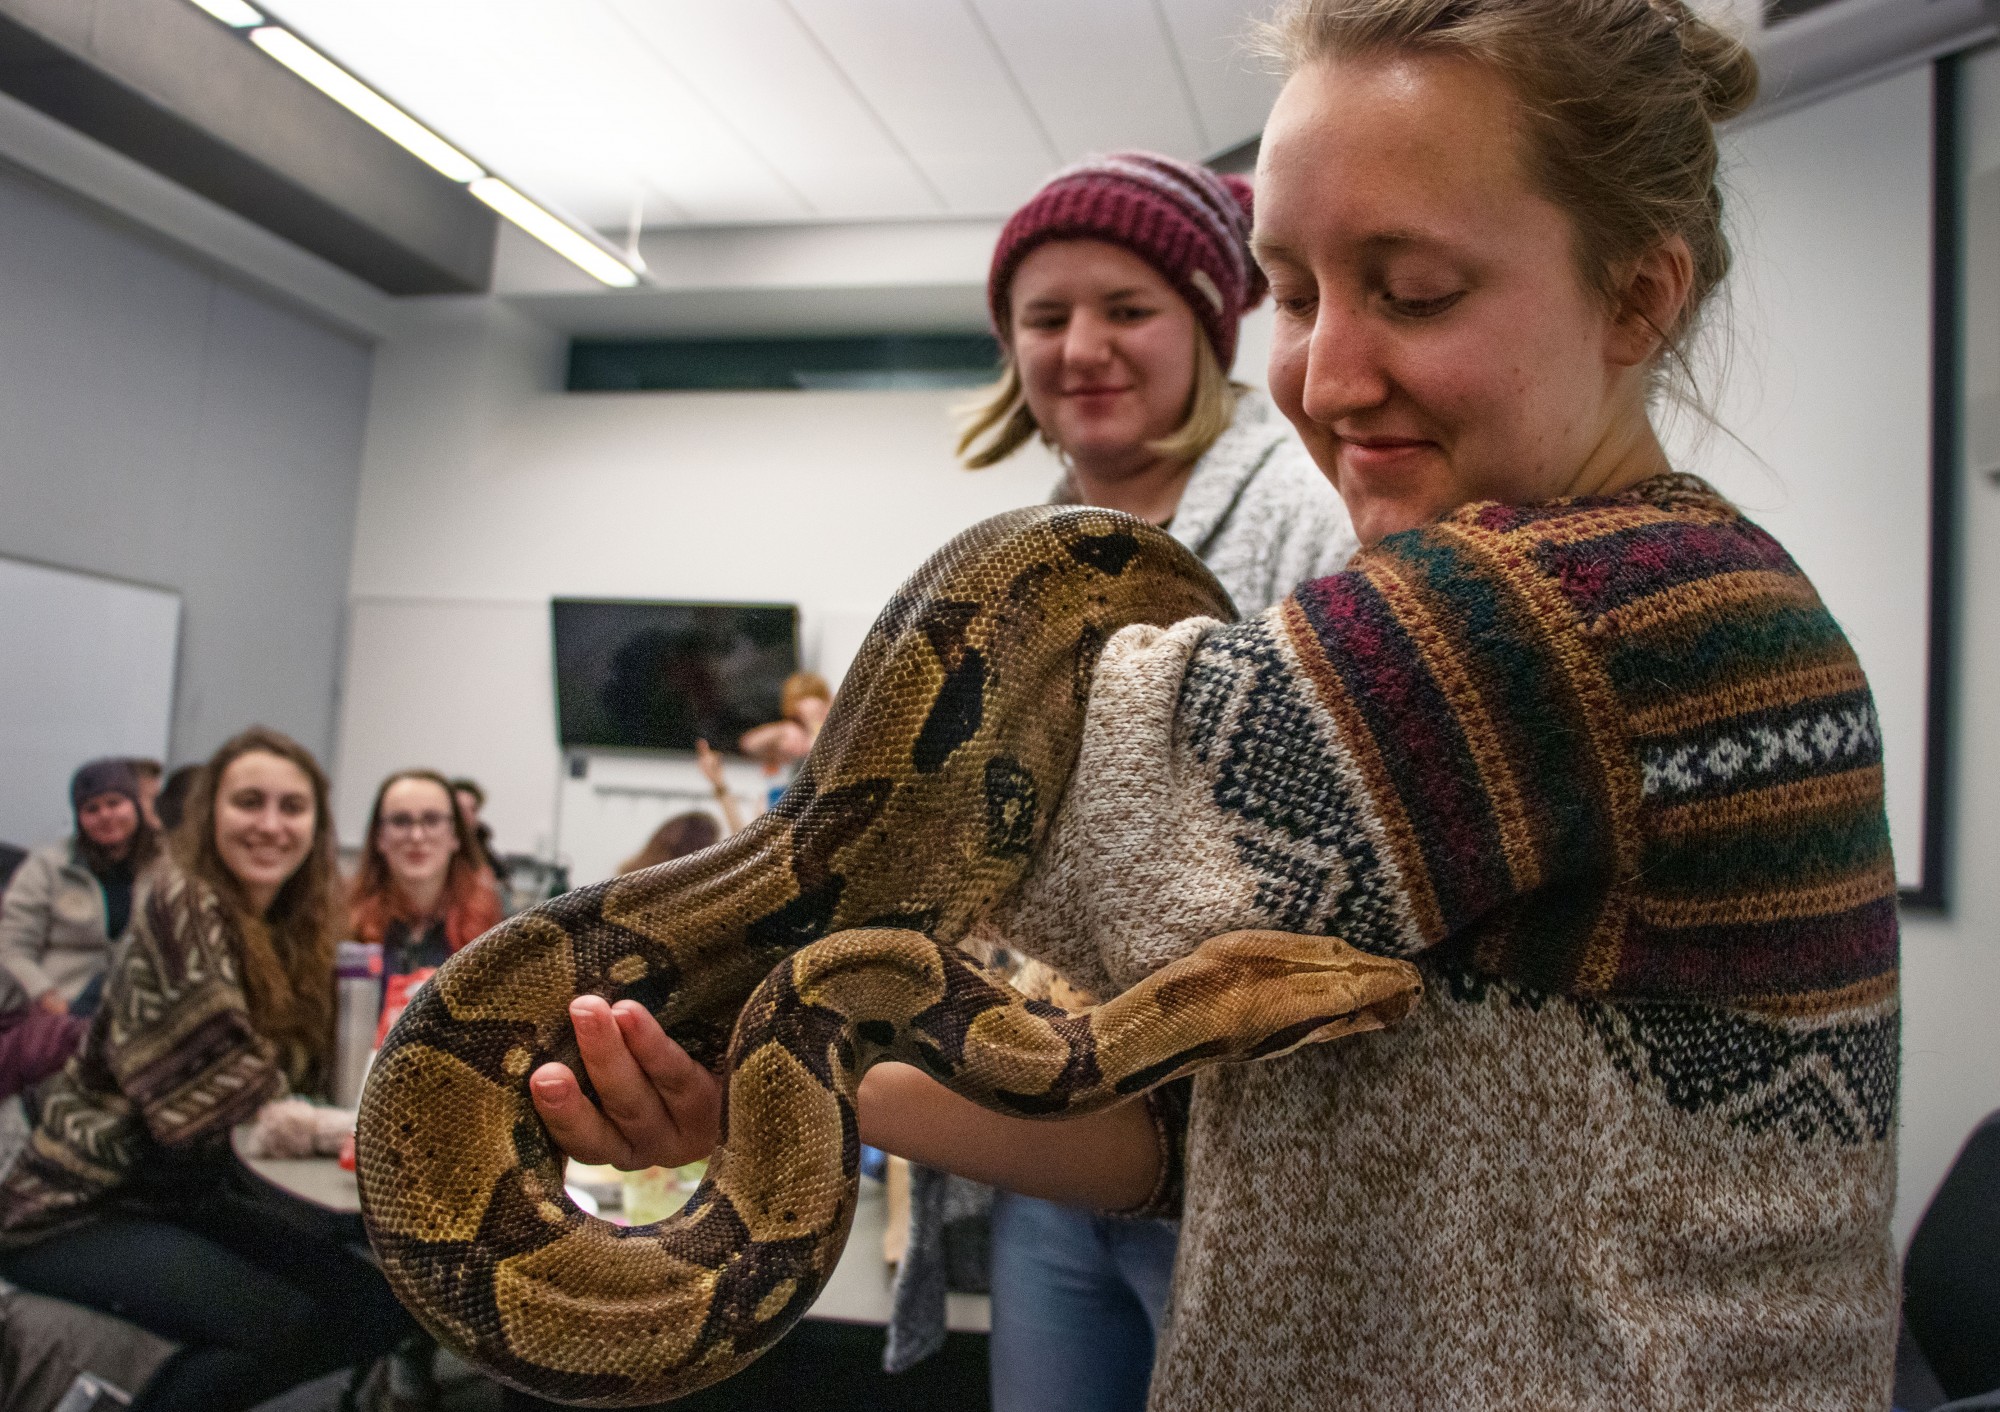 Ecology Club president Kristin Robinson, right. holds Bruce the boa constrictor with club officer Carrie Thom, center, as Sara Crader and Annika Herdtle, left, look on at the Ecology Club’s Valentine’s Day event in Bruininks Hall on Thursday, Feb. 13. The event introduced students to animals that “nobody loves” including snakes, frogs, and scorpions. 